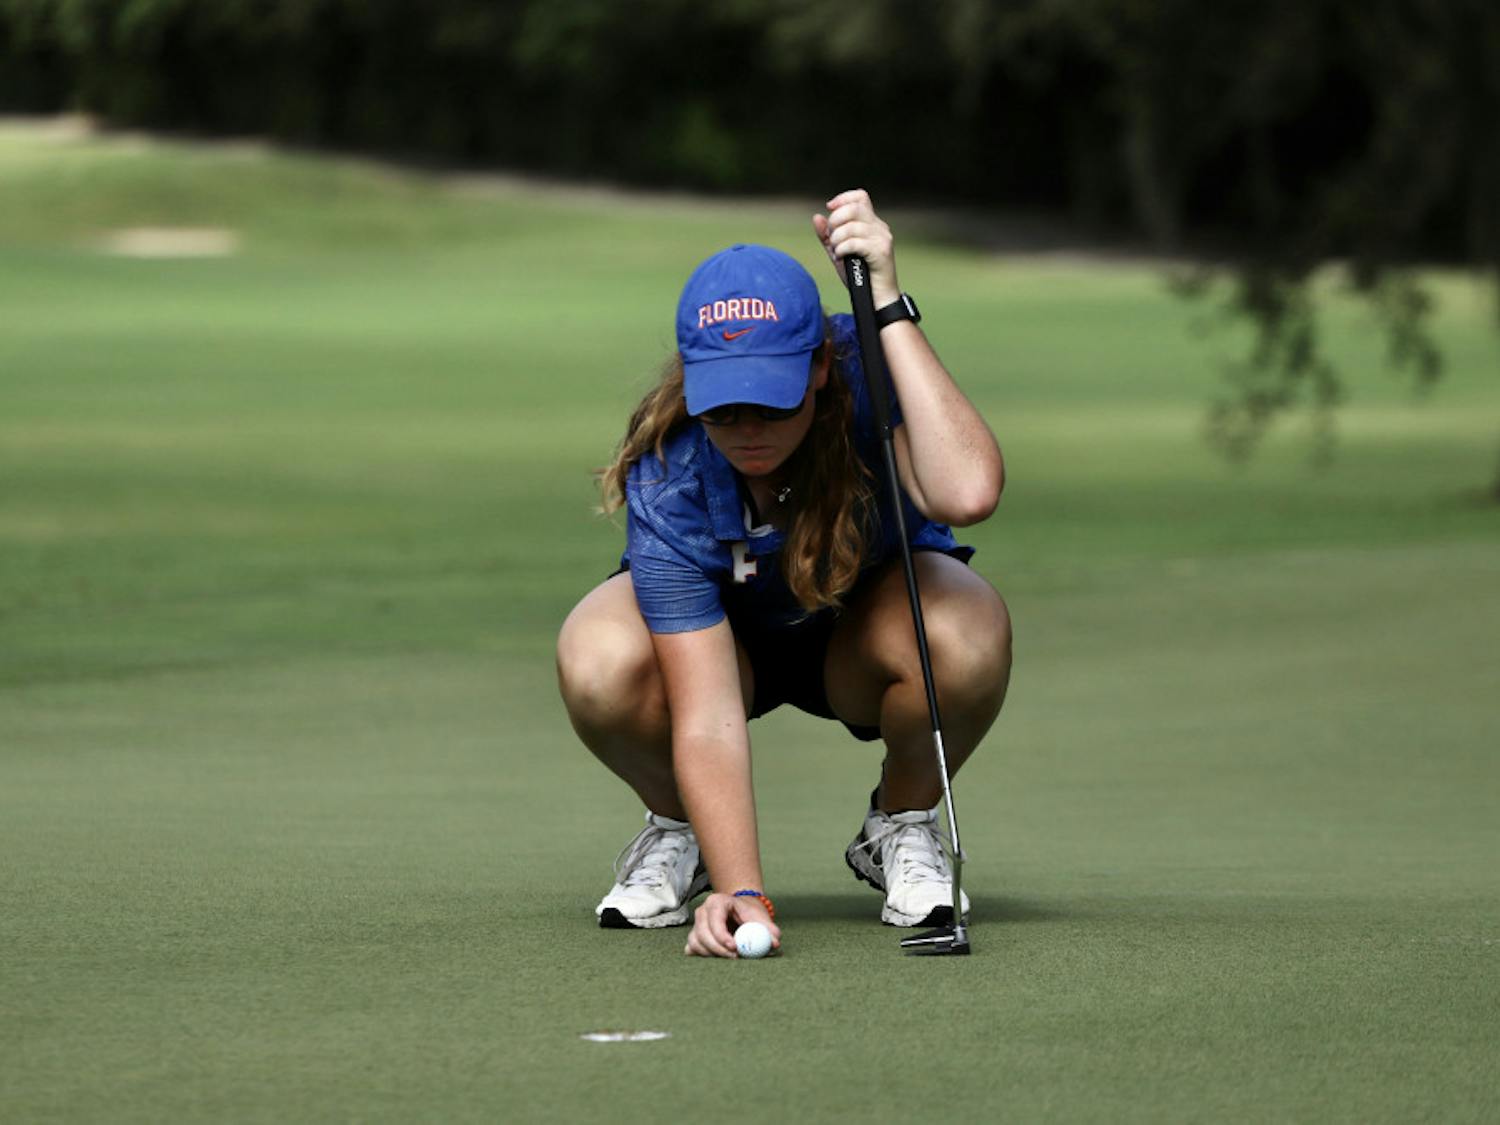 Senior Addie Baggarly practices at Mark Bostick Golf Course. Baggarly and freshman Maisie Filler are currently tied for third overall in the Gators' first tournament of the season.